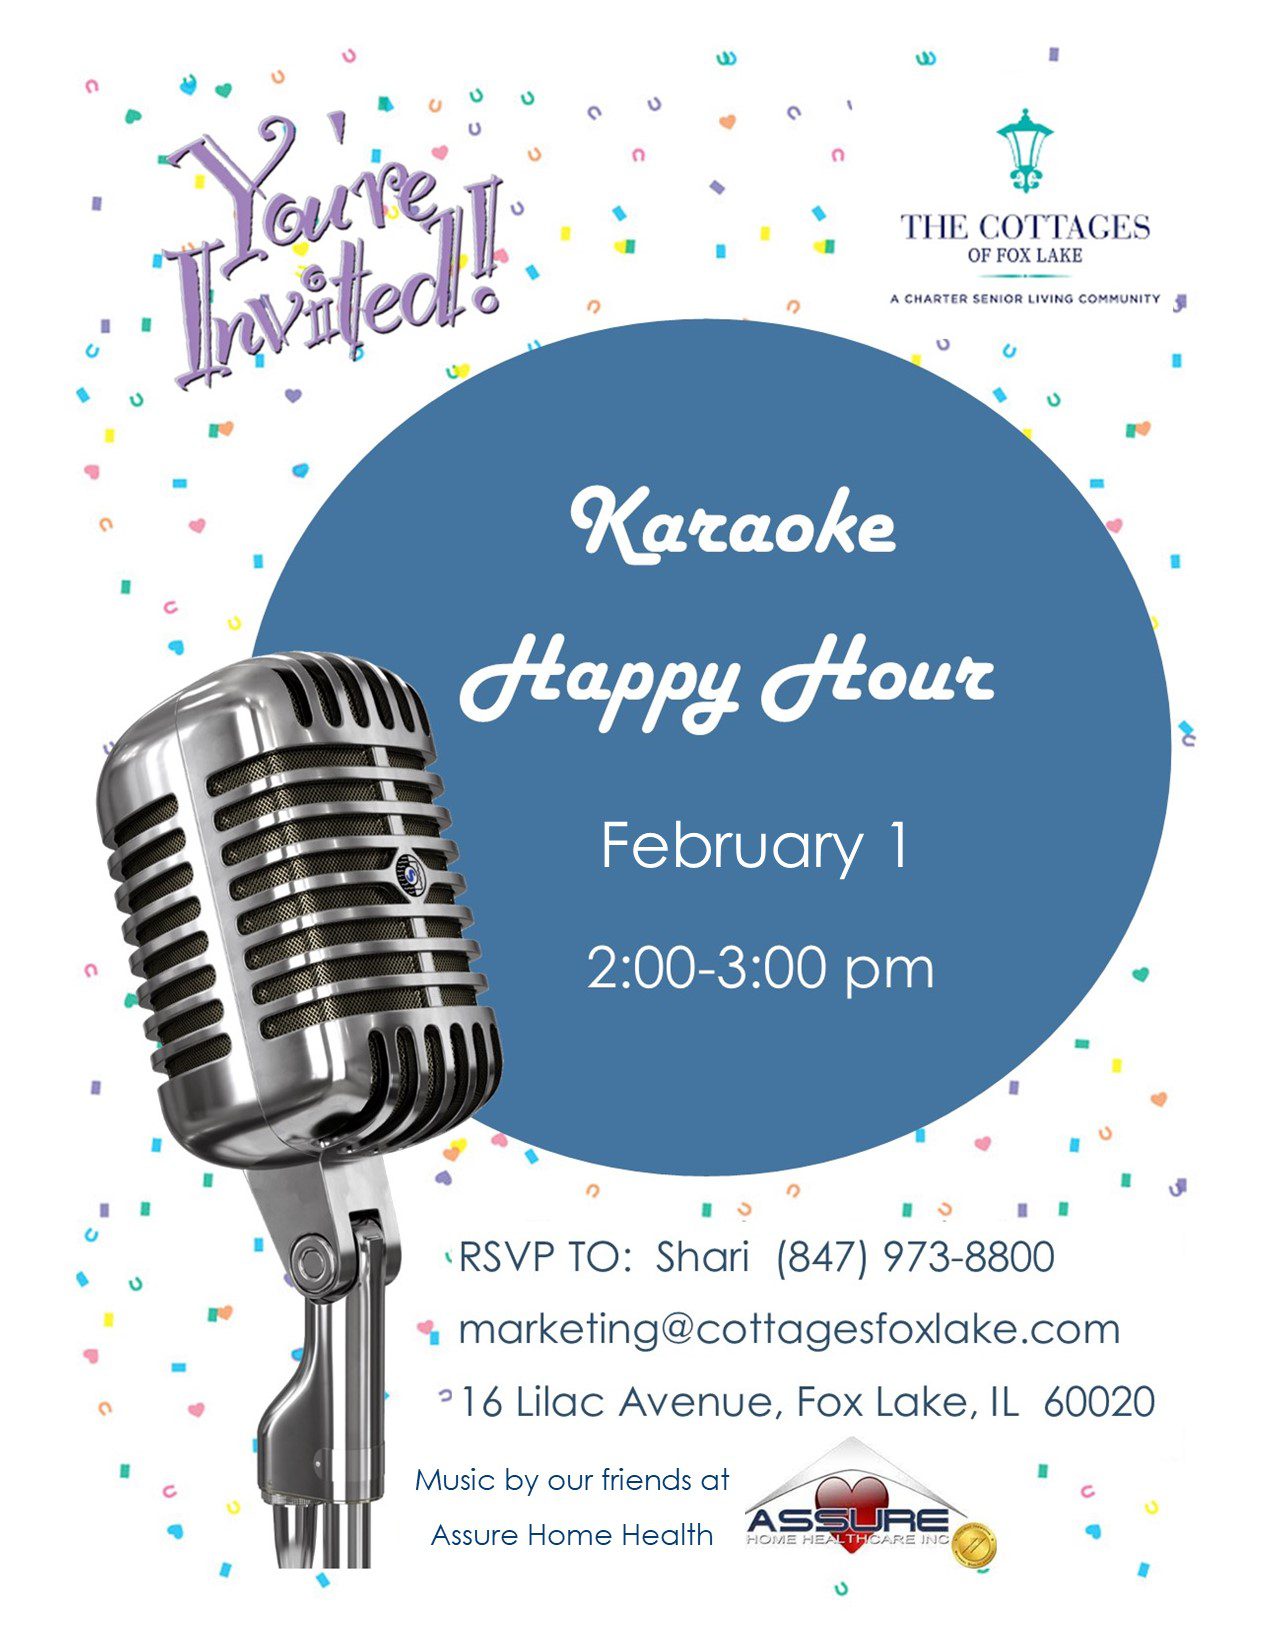 Cottages of Fox Lake - Assisted Living and Memory Care - Karaoke Happy Hour